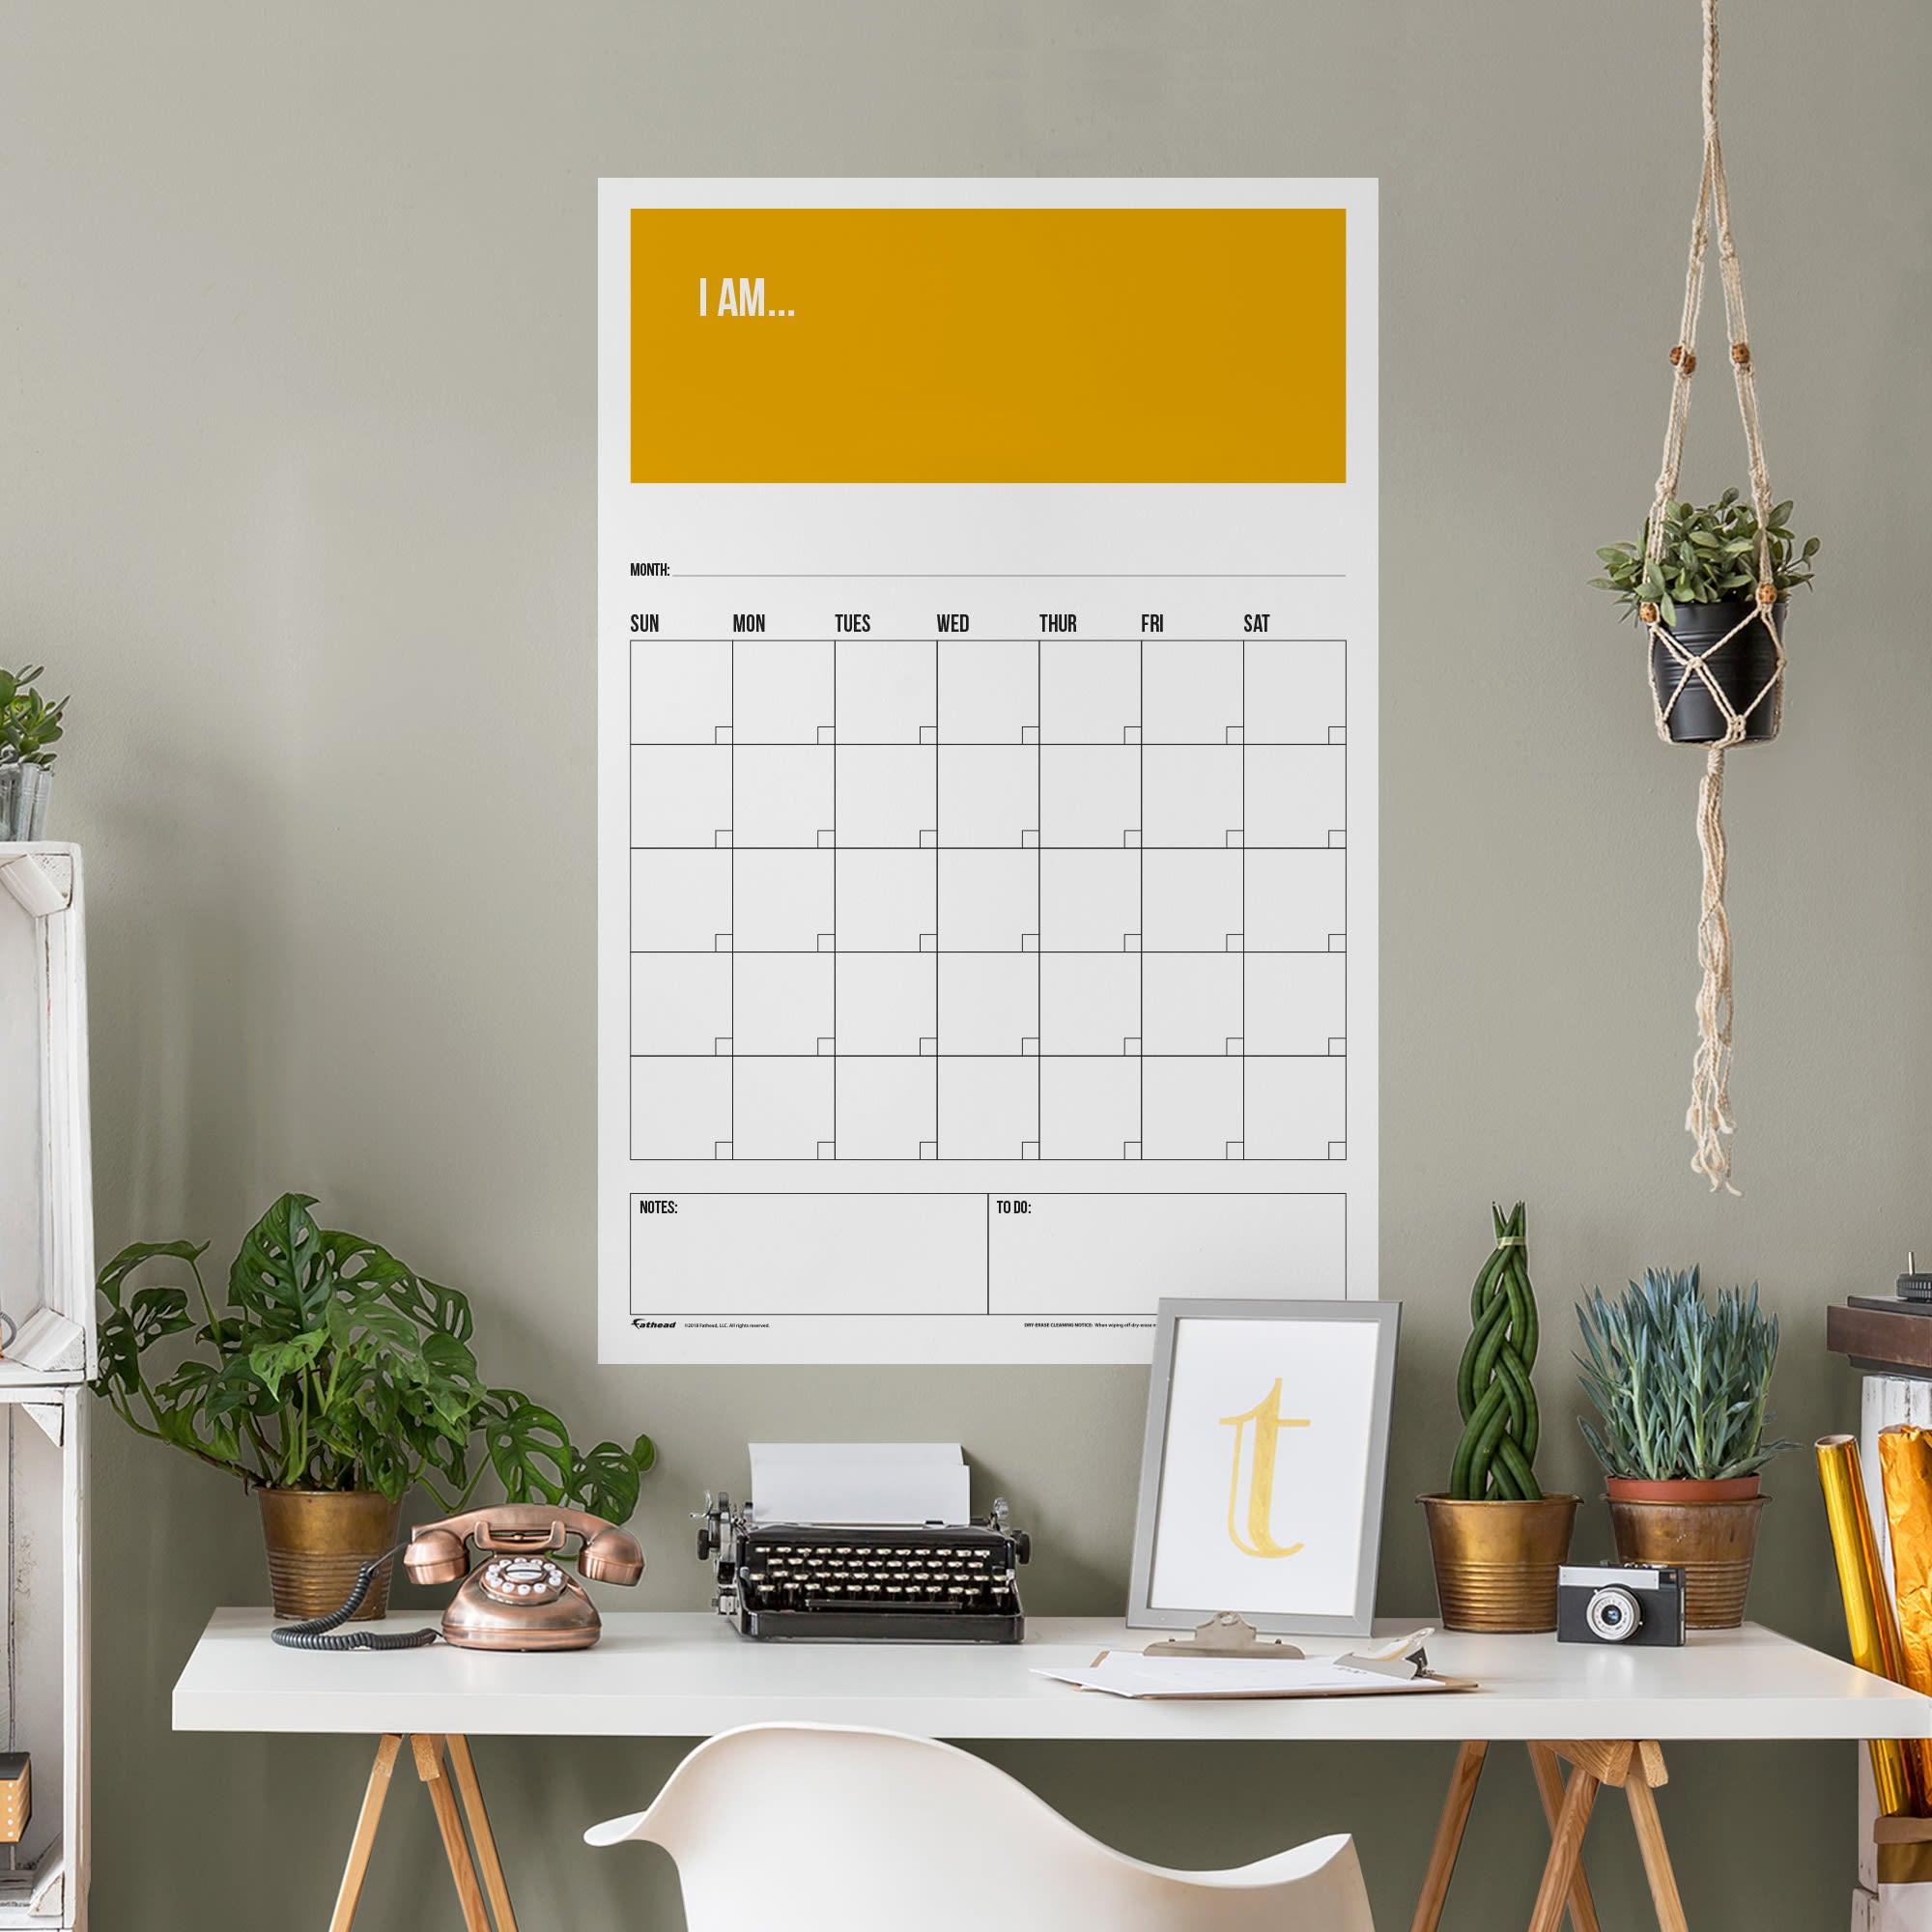 One Month Calendar: "I Am" Design - Removable Dry Erase Vinyl Decal 26.0"W x 39.5"H by Fathead